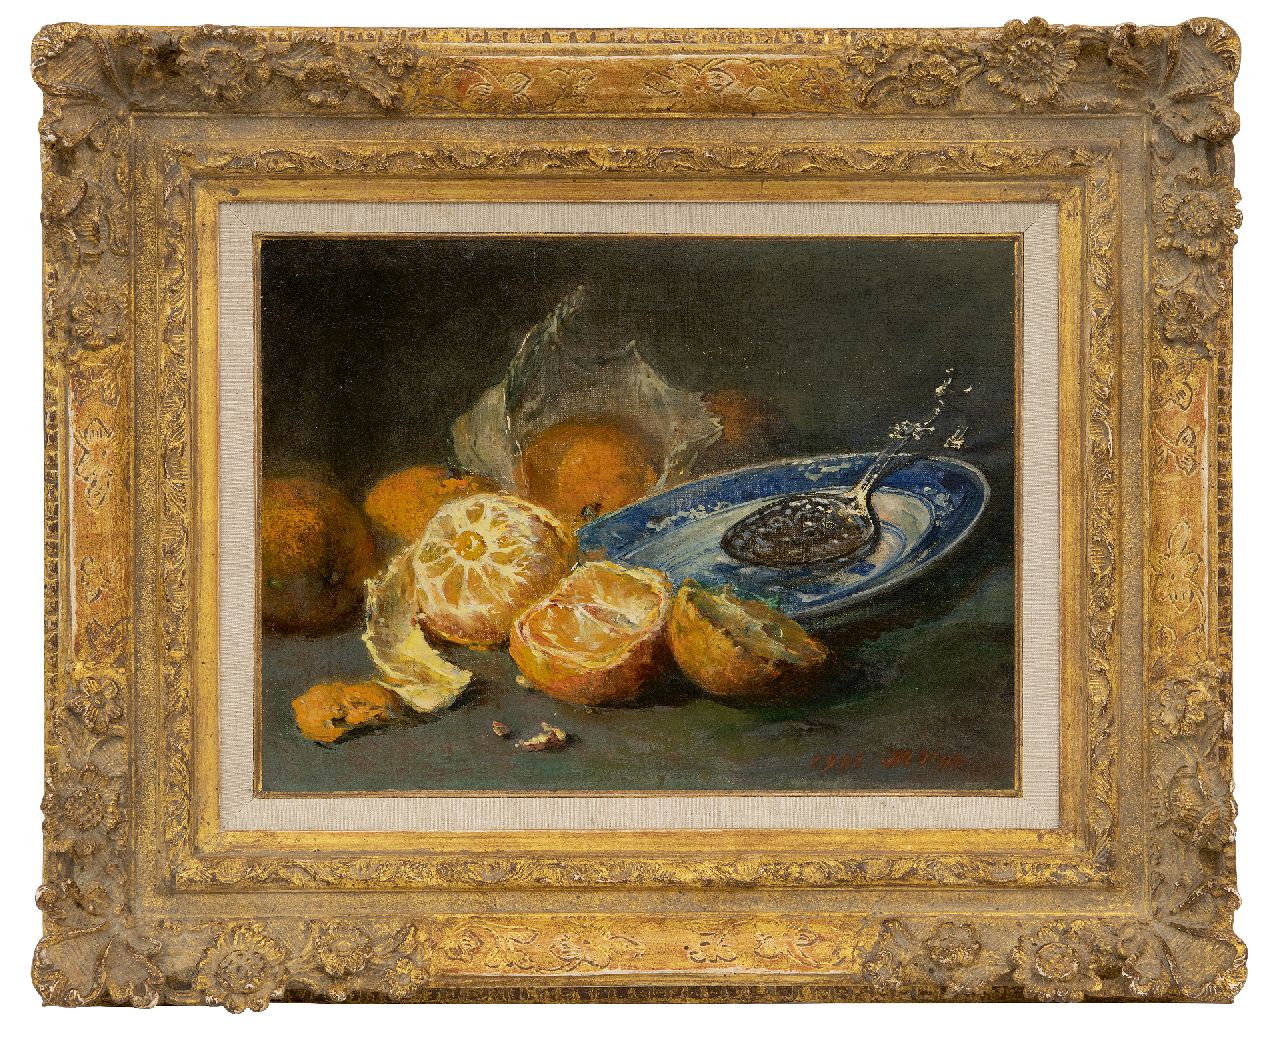 Vos M.  | Maria Vos, Still life with oranges and a blue and white plate, oil on canvas 25.4 x 34.1 cm, signed l.r. and dated 1906